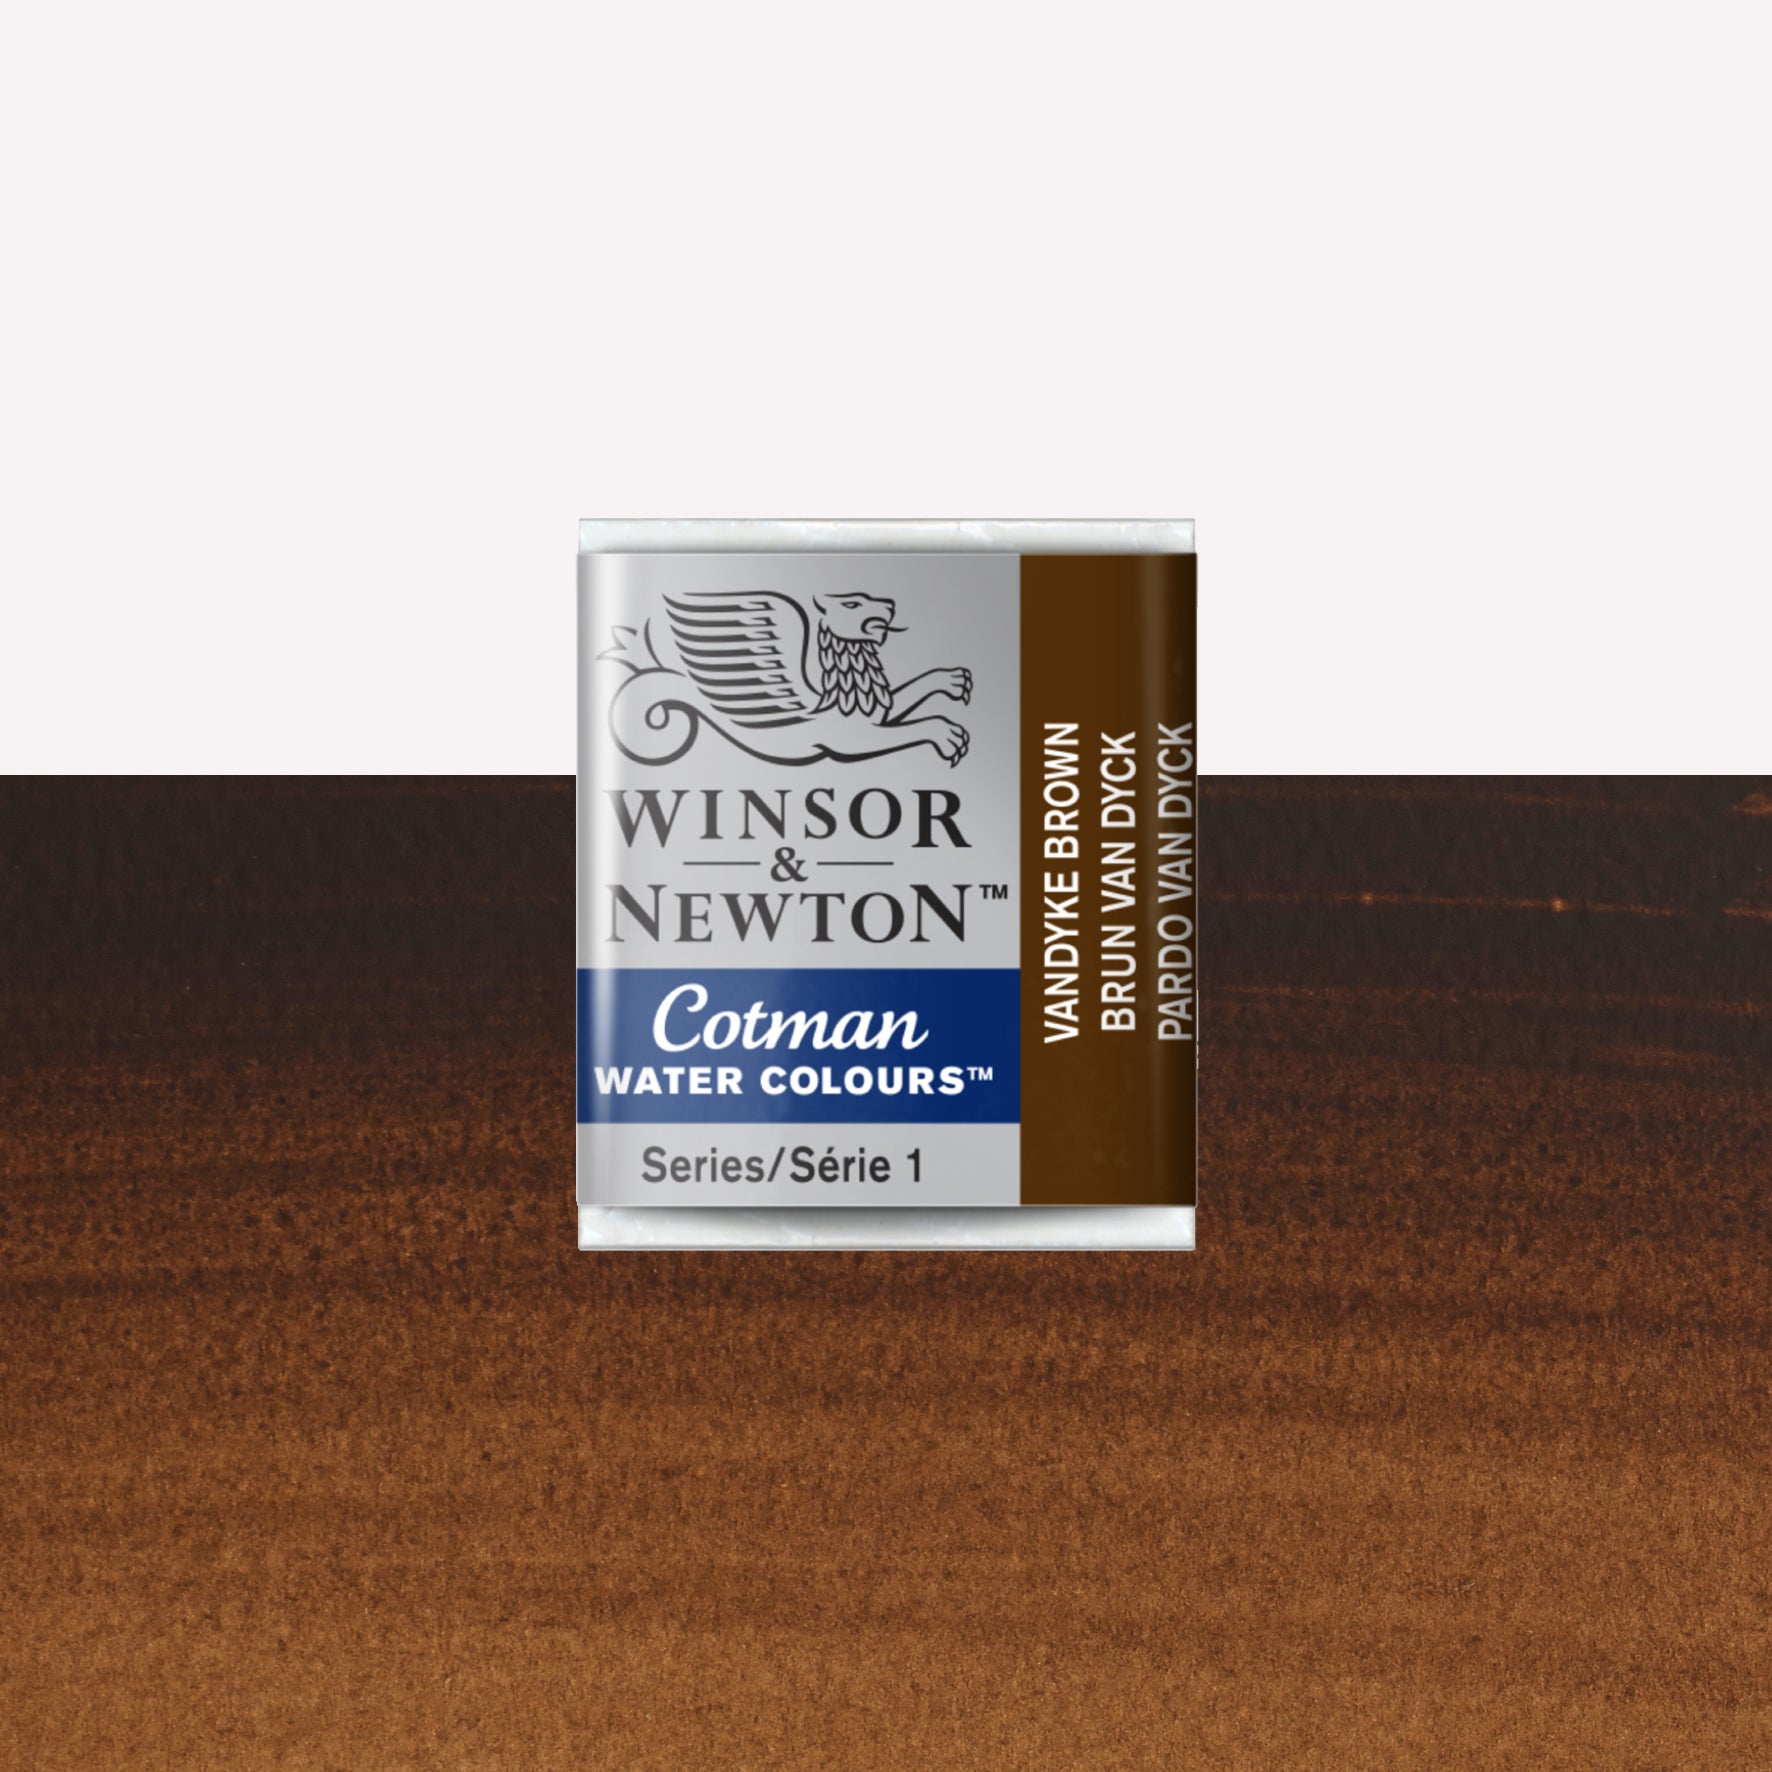 Winsor & Newton Cotman watercolour half pan in the shade Vandyke Brown over a vibrant colour swatch. These half pans have a solid formula and are packaged in compressed paint cake. 